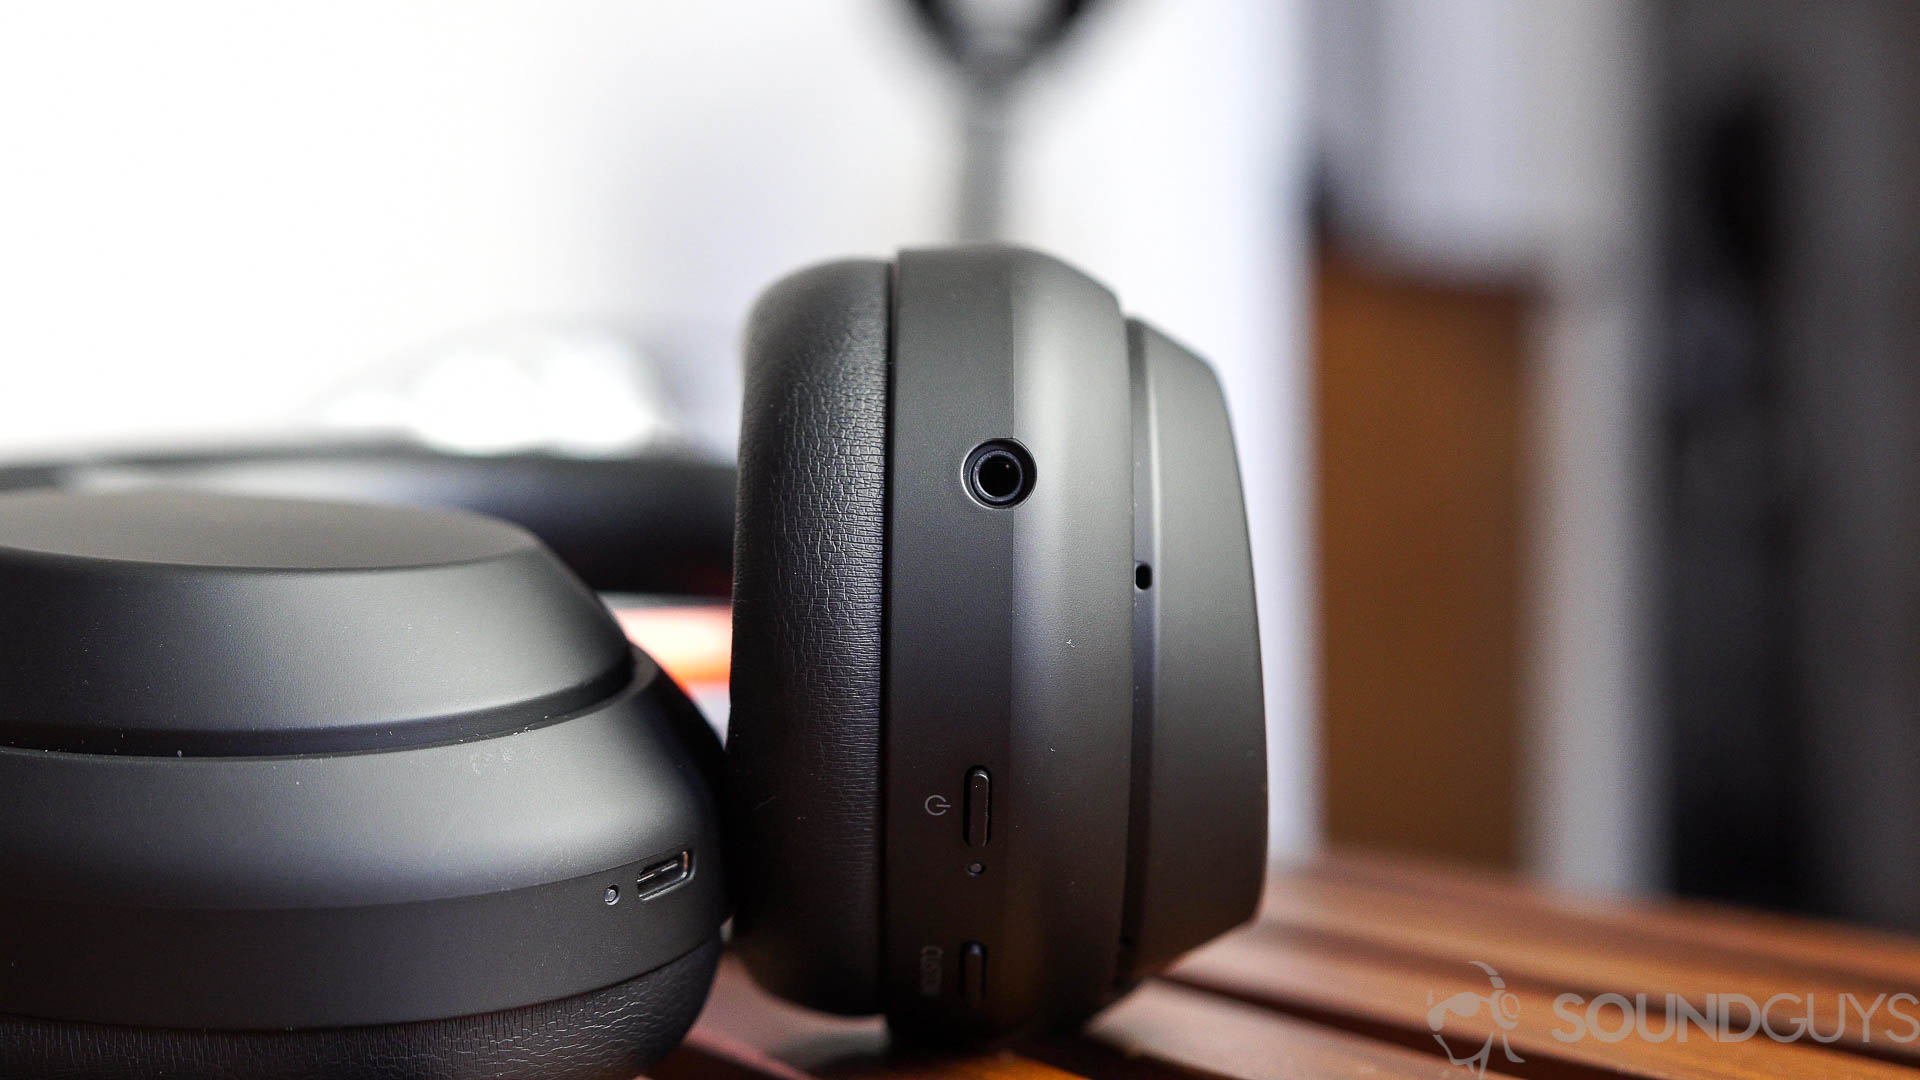 Photo of the Sony WH 1000XM4 noise canceling headphone inputs and buttons on the ear cups.